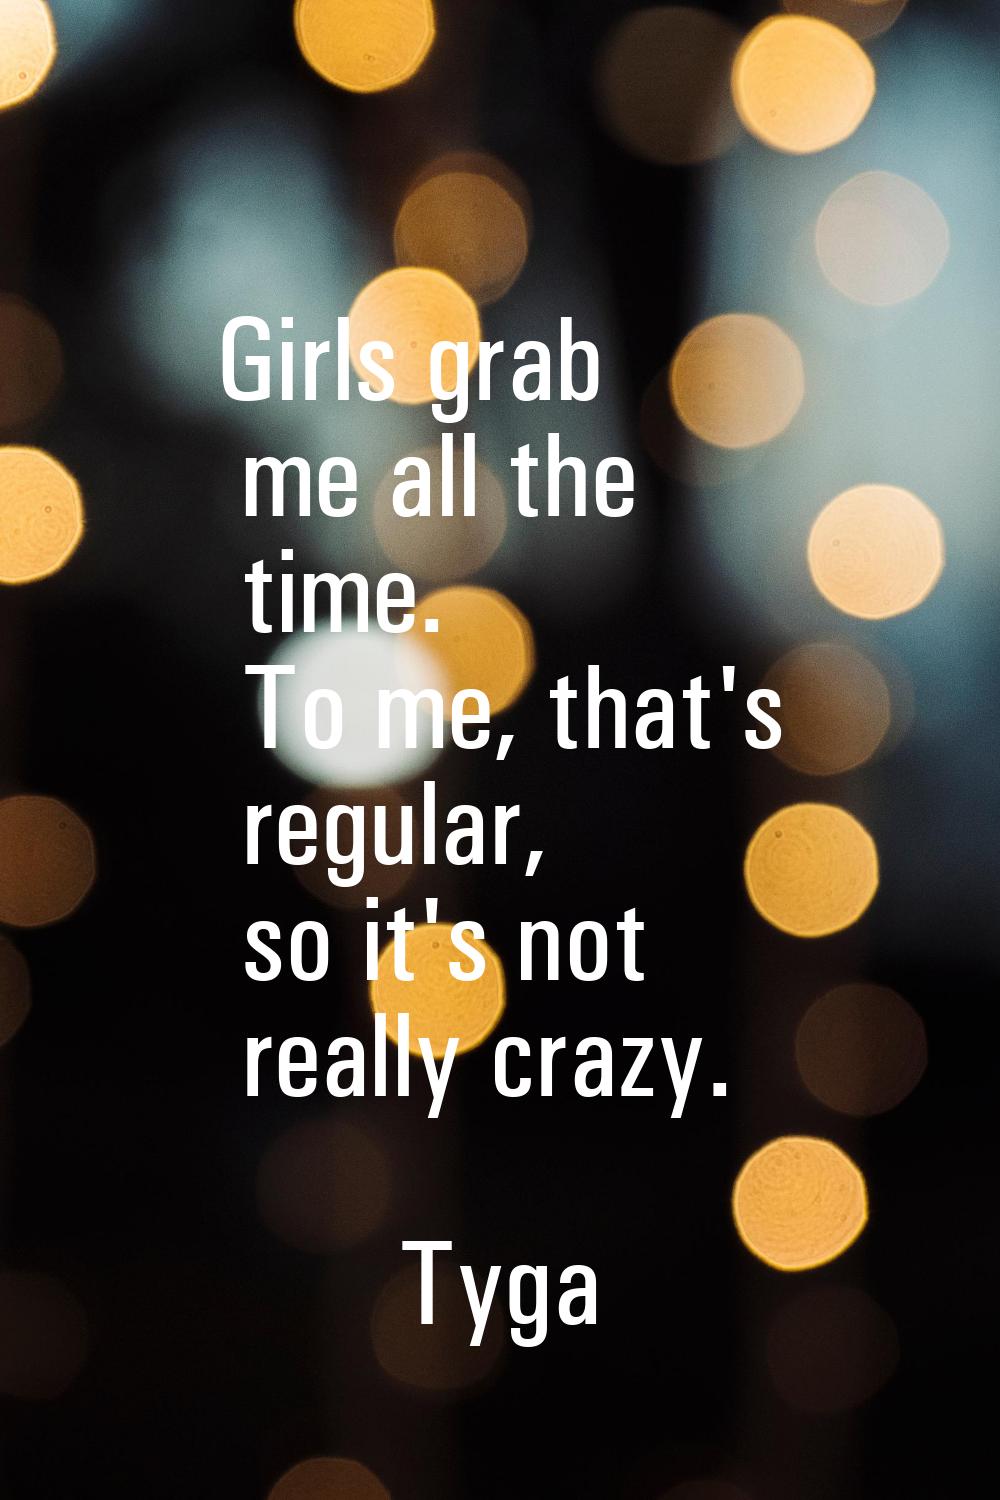 Girls grab me all the time. To me, that's regular, so it's not really crazy.